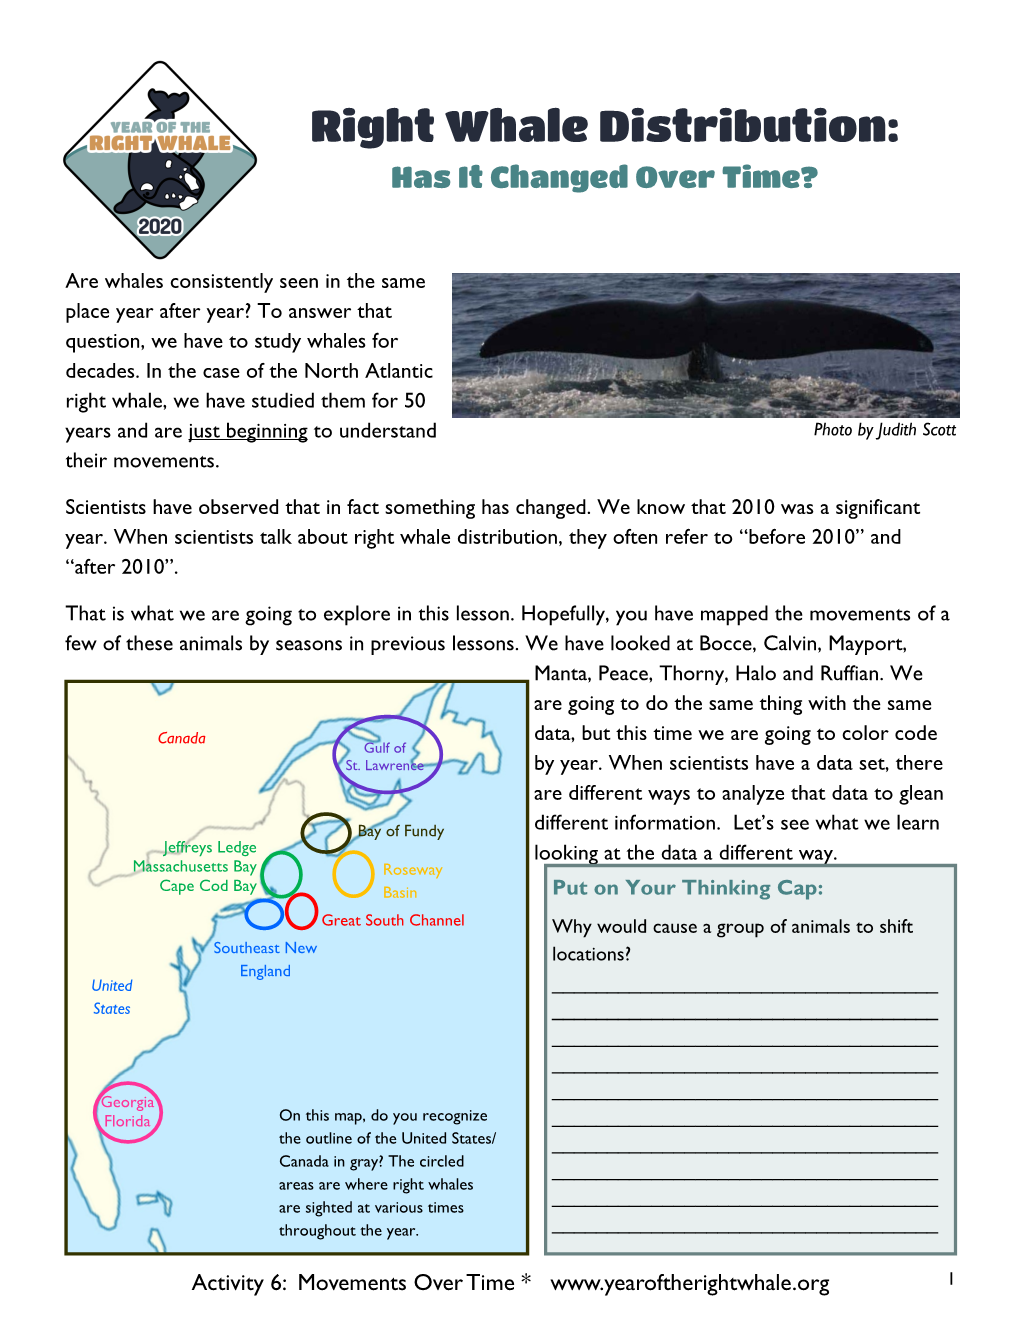 Right Whale Distribution: Has It Changed Over Time?